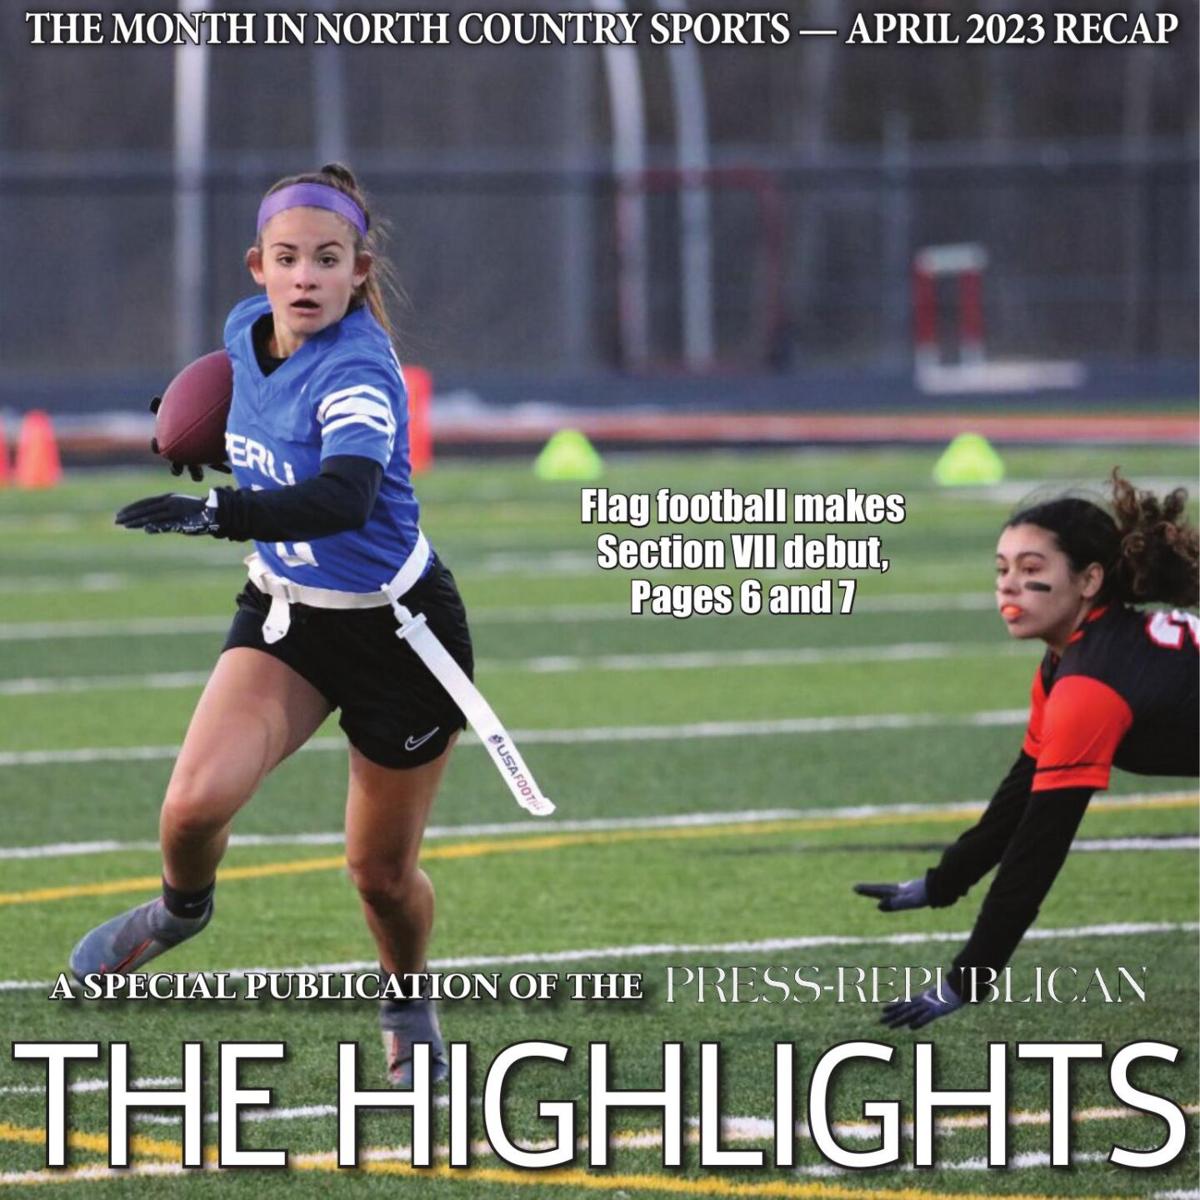 The Highlights: April 2023